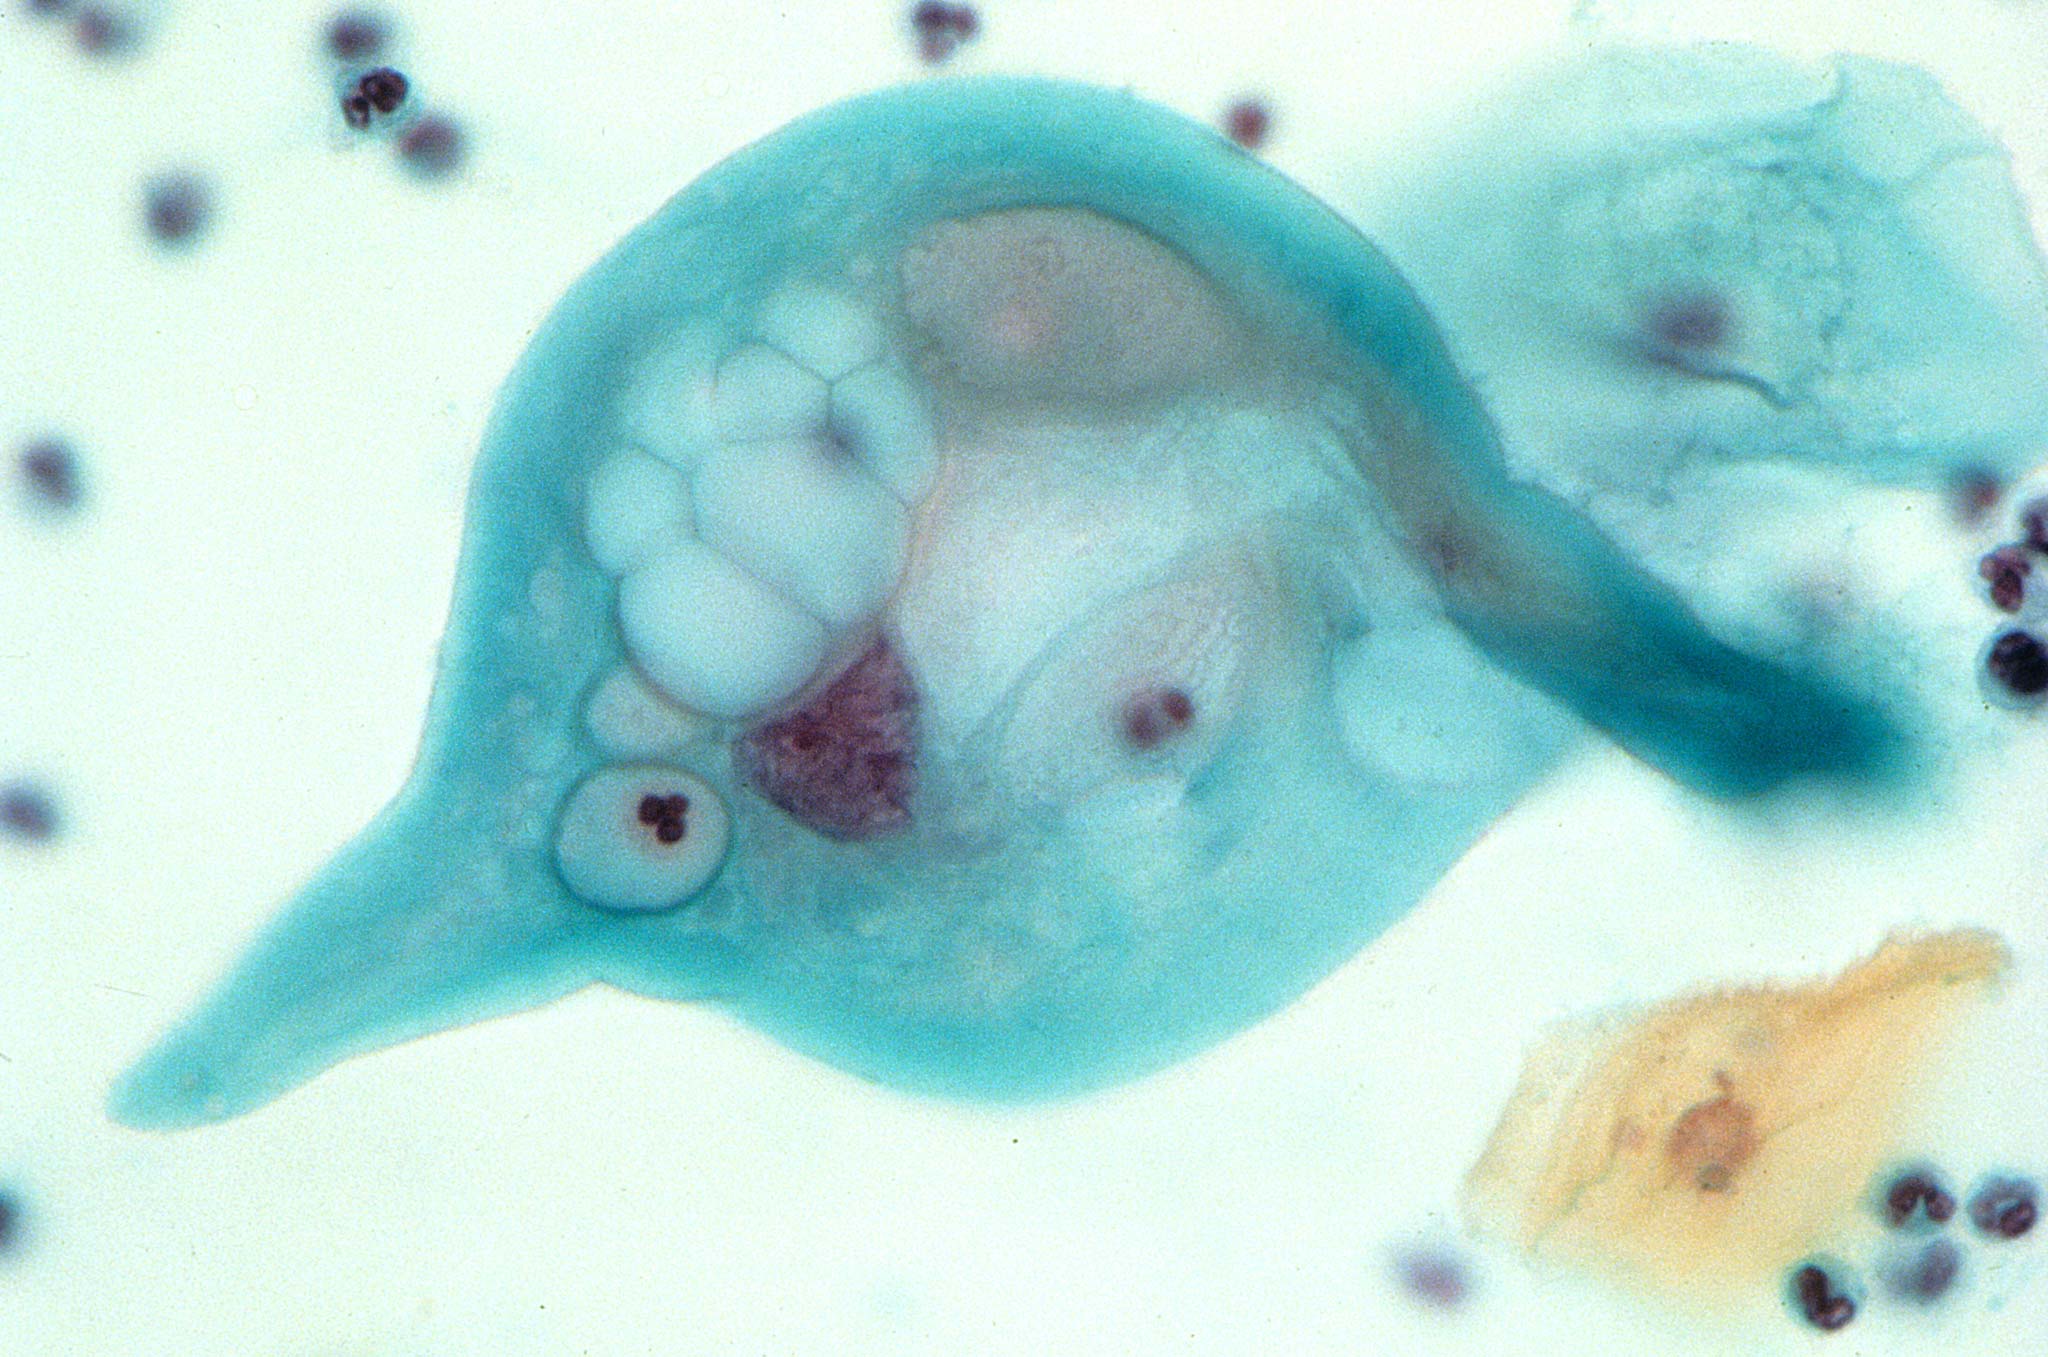 Cervico Vaginal Smear Showing An Abnormal Epithelial Cell Exhibiting